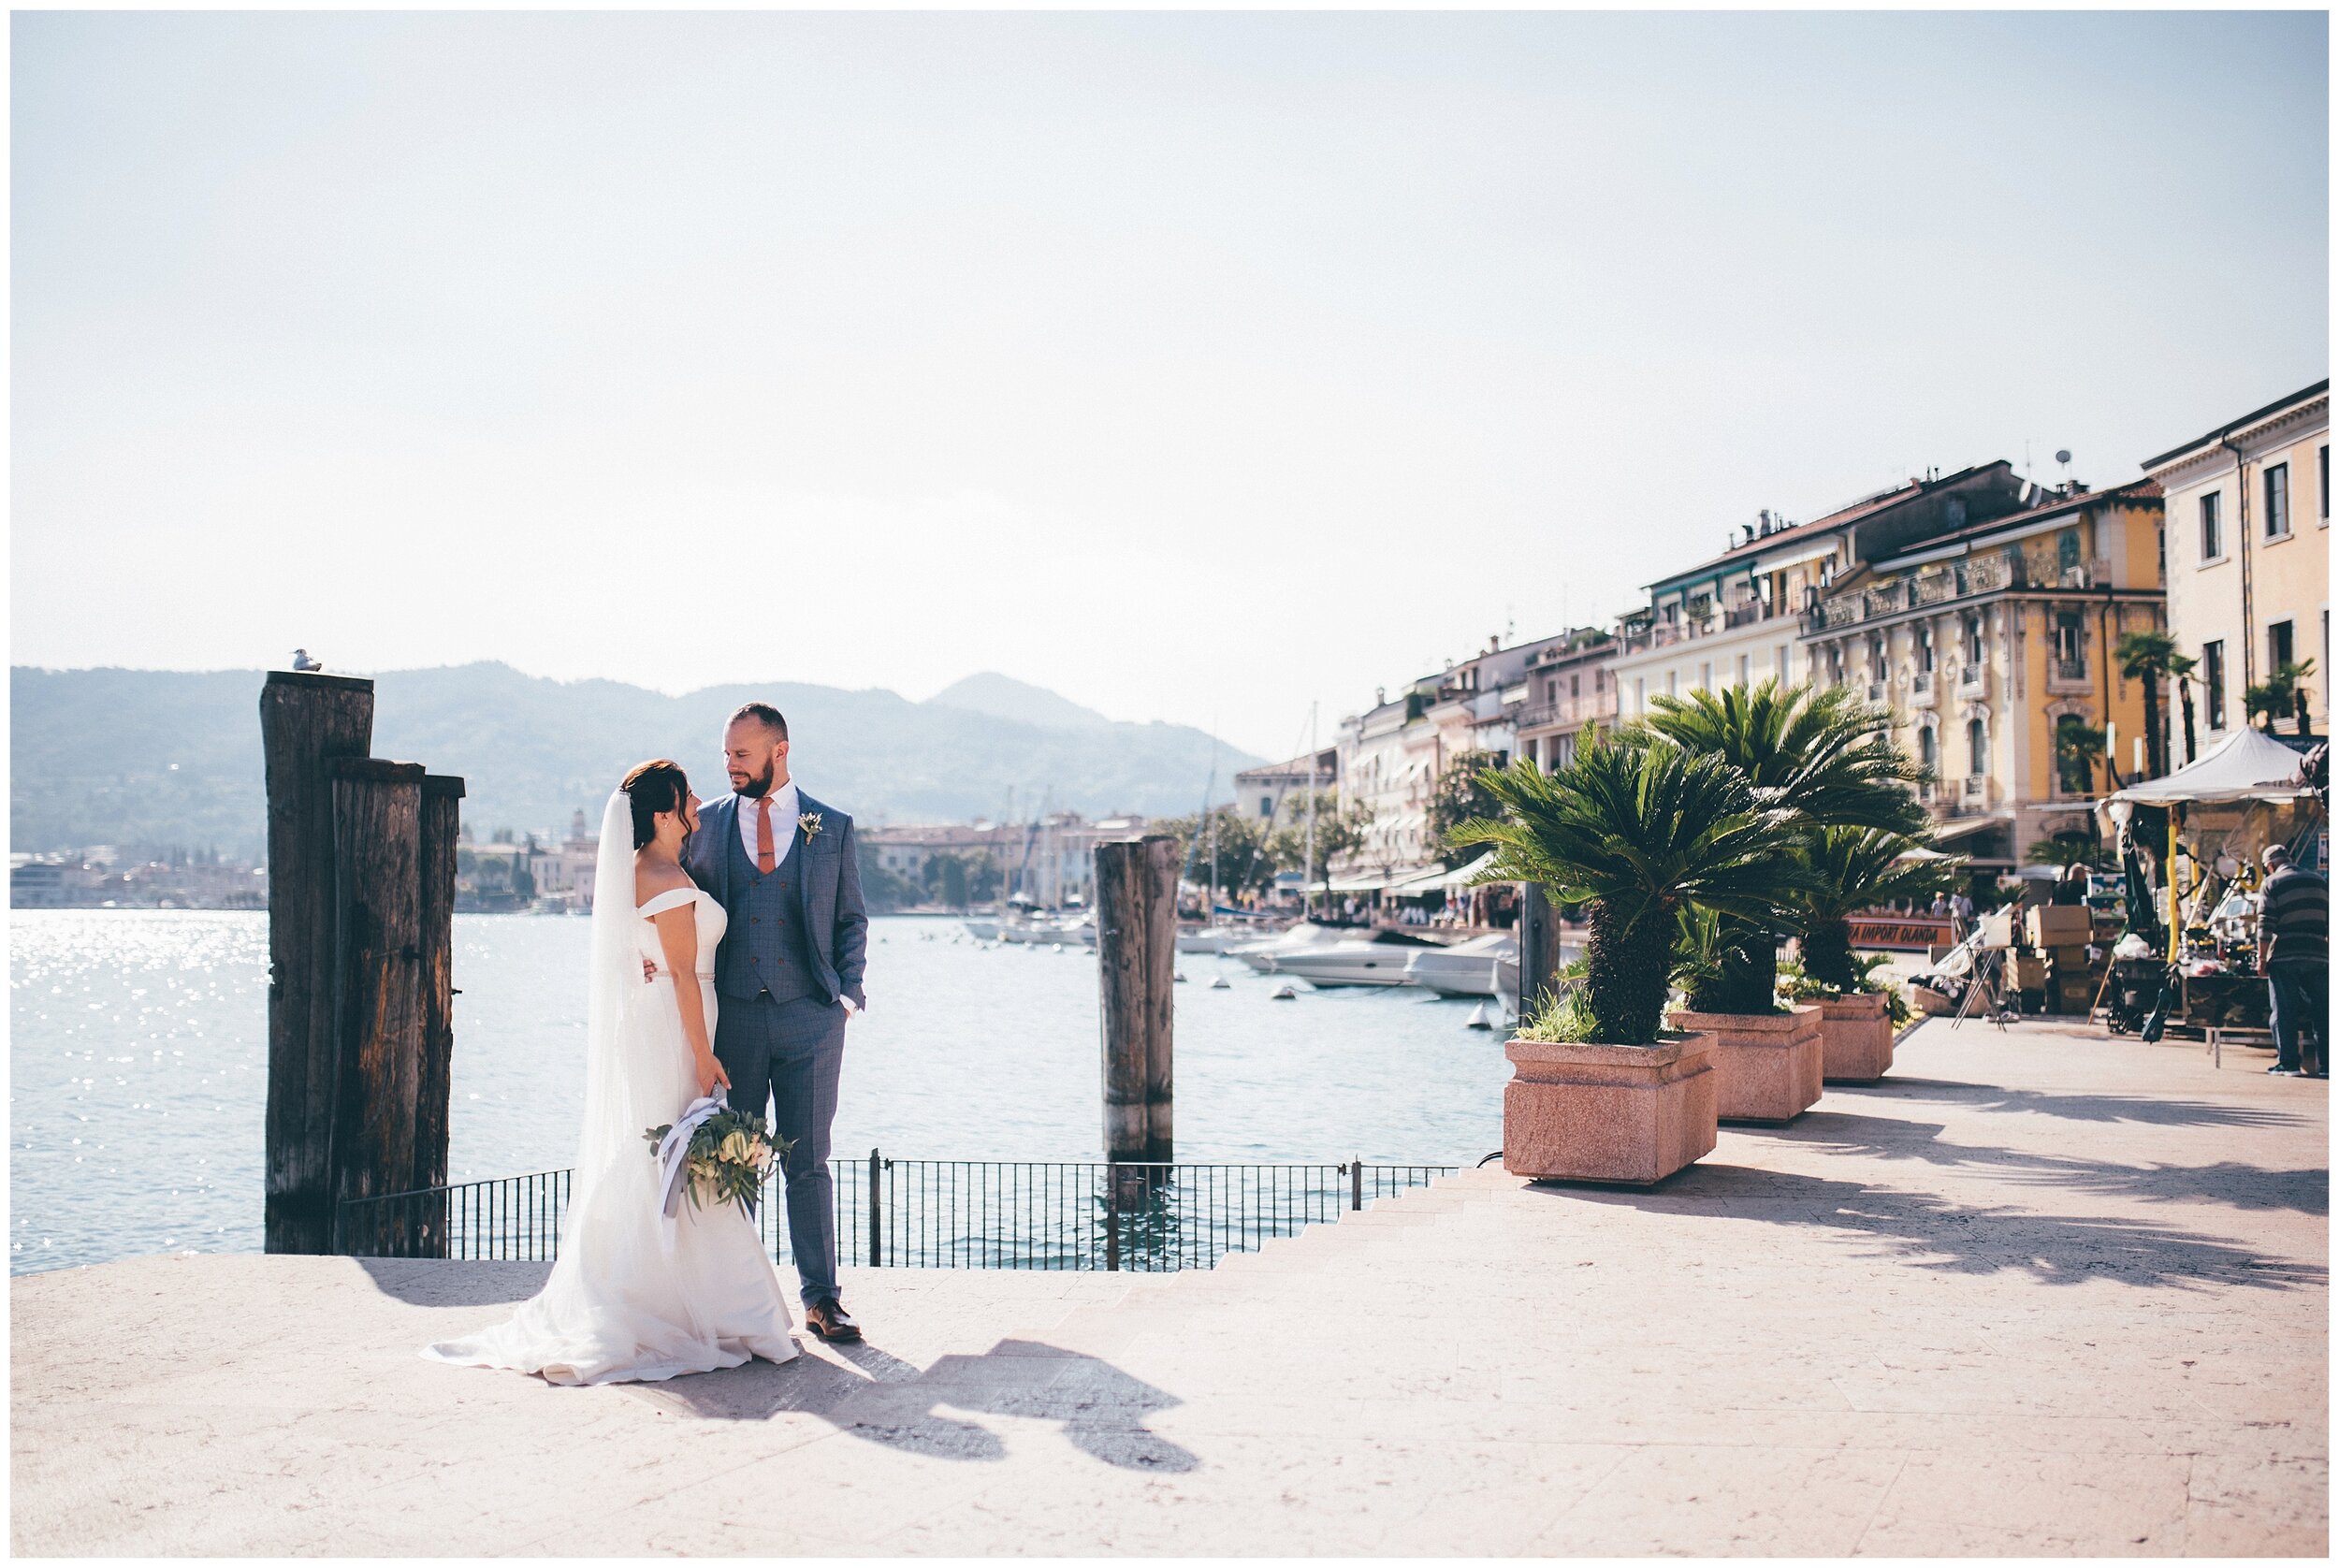 Salo town centre wedding photographs with Lake Garda in the background.